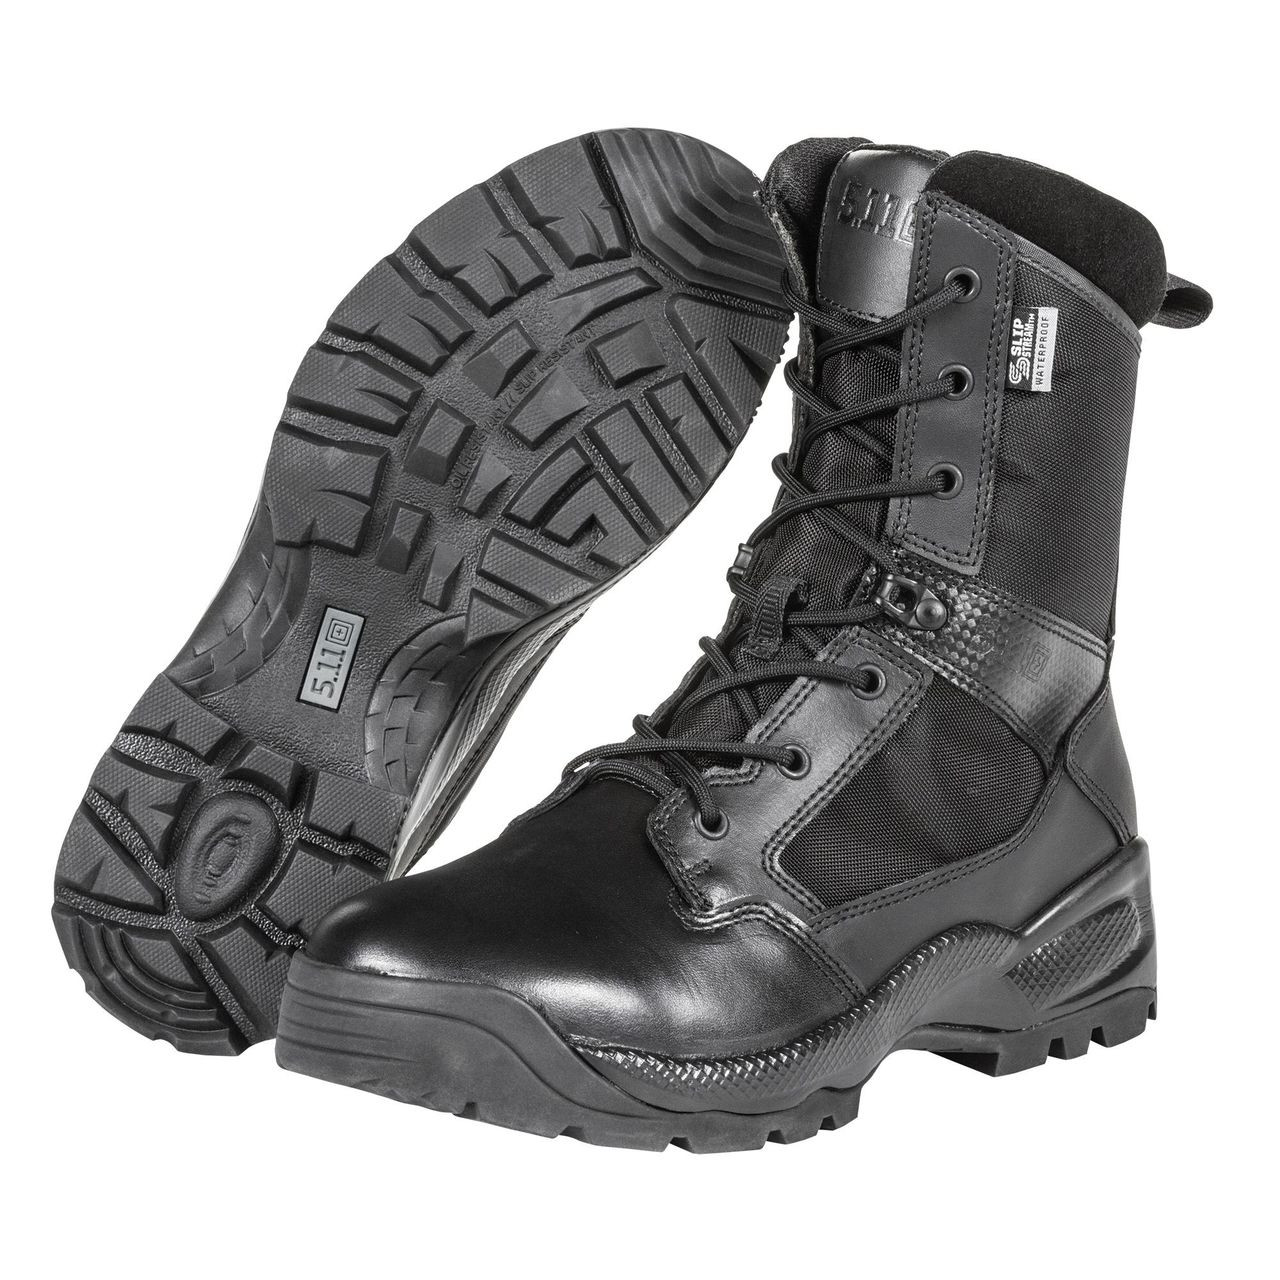 5.11 tactical work boots